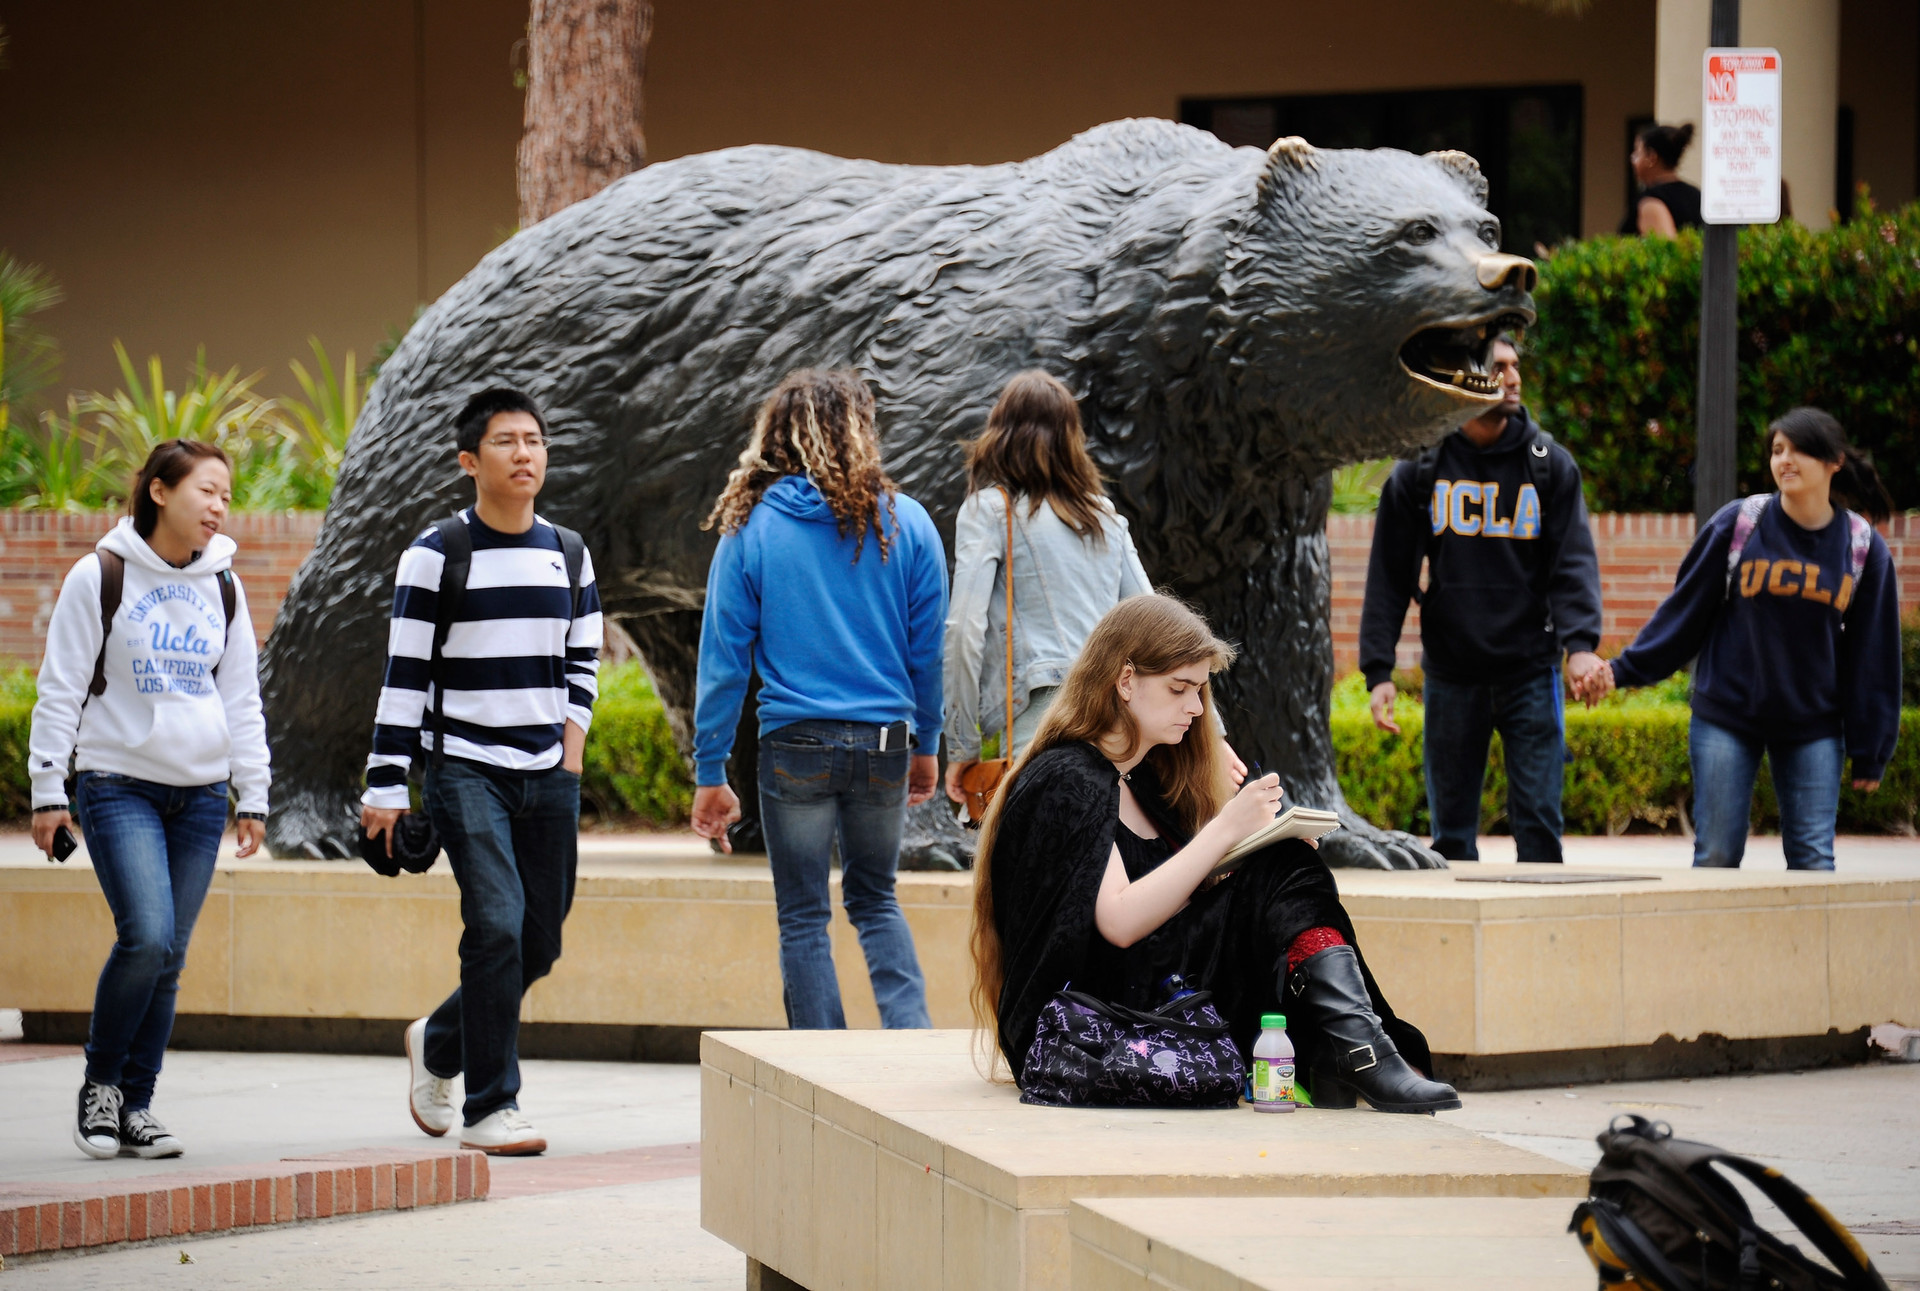 A large, bronze statue of a bear showing its teeth is displayed outdoors on an university campus. Six students in UCLA hooded sweatshirts and jeans walk around the statue on their way to class. One young woman sits on a tan, chunky bench writing on a notepad.